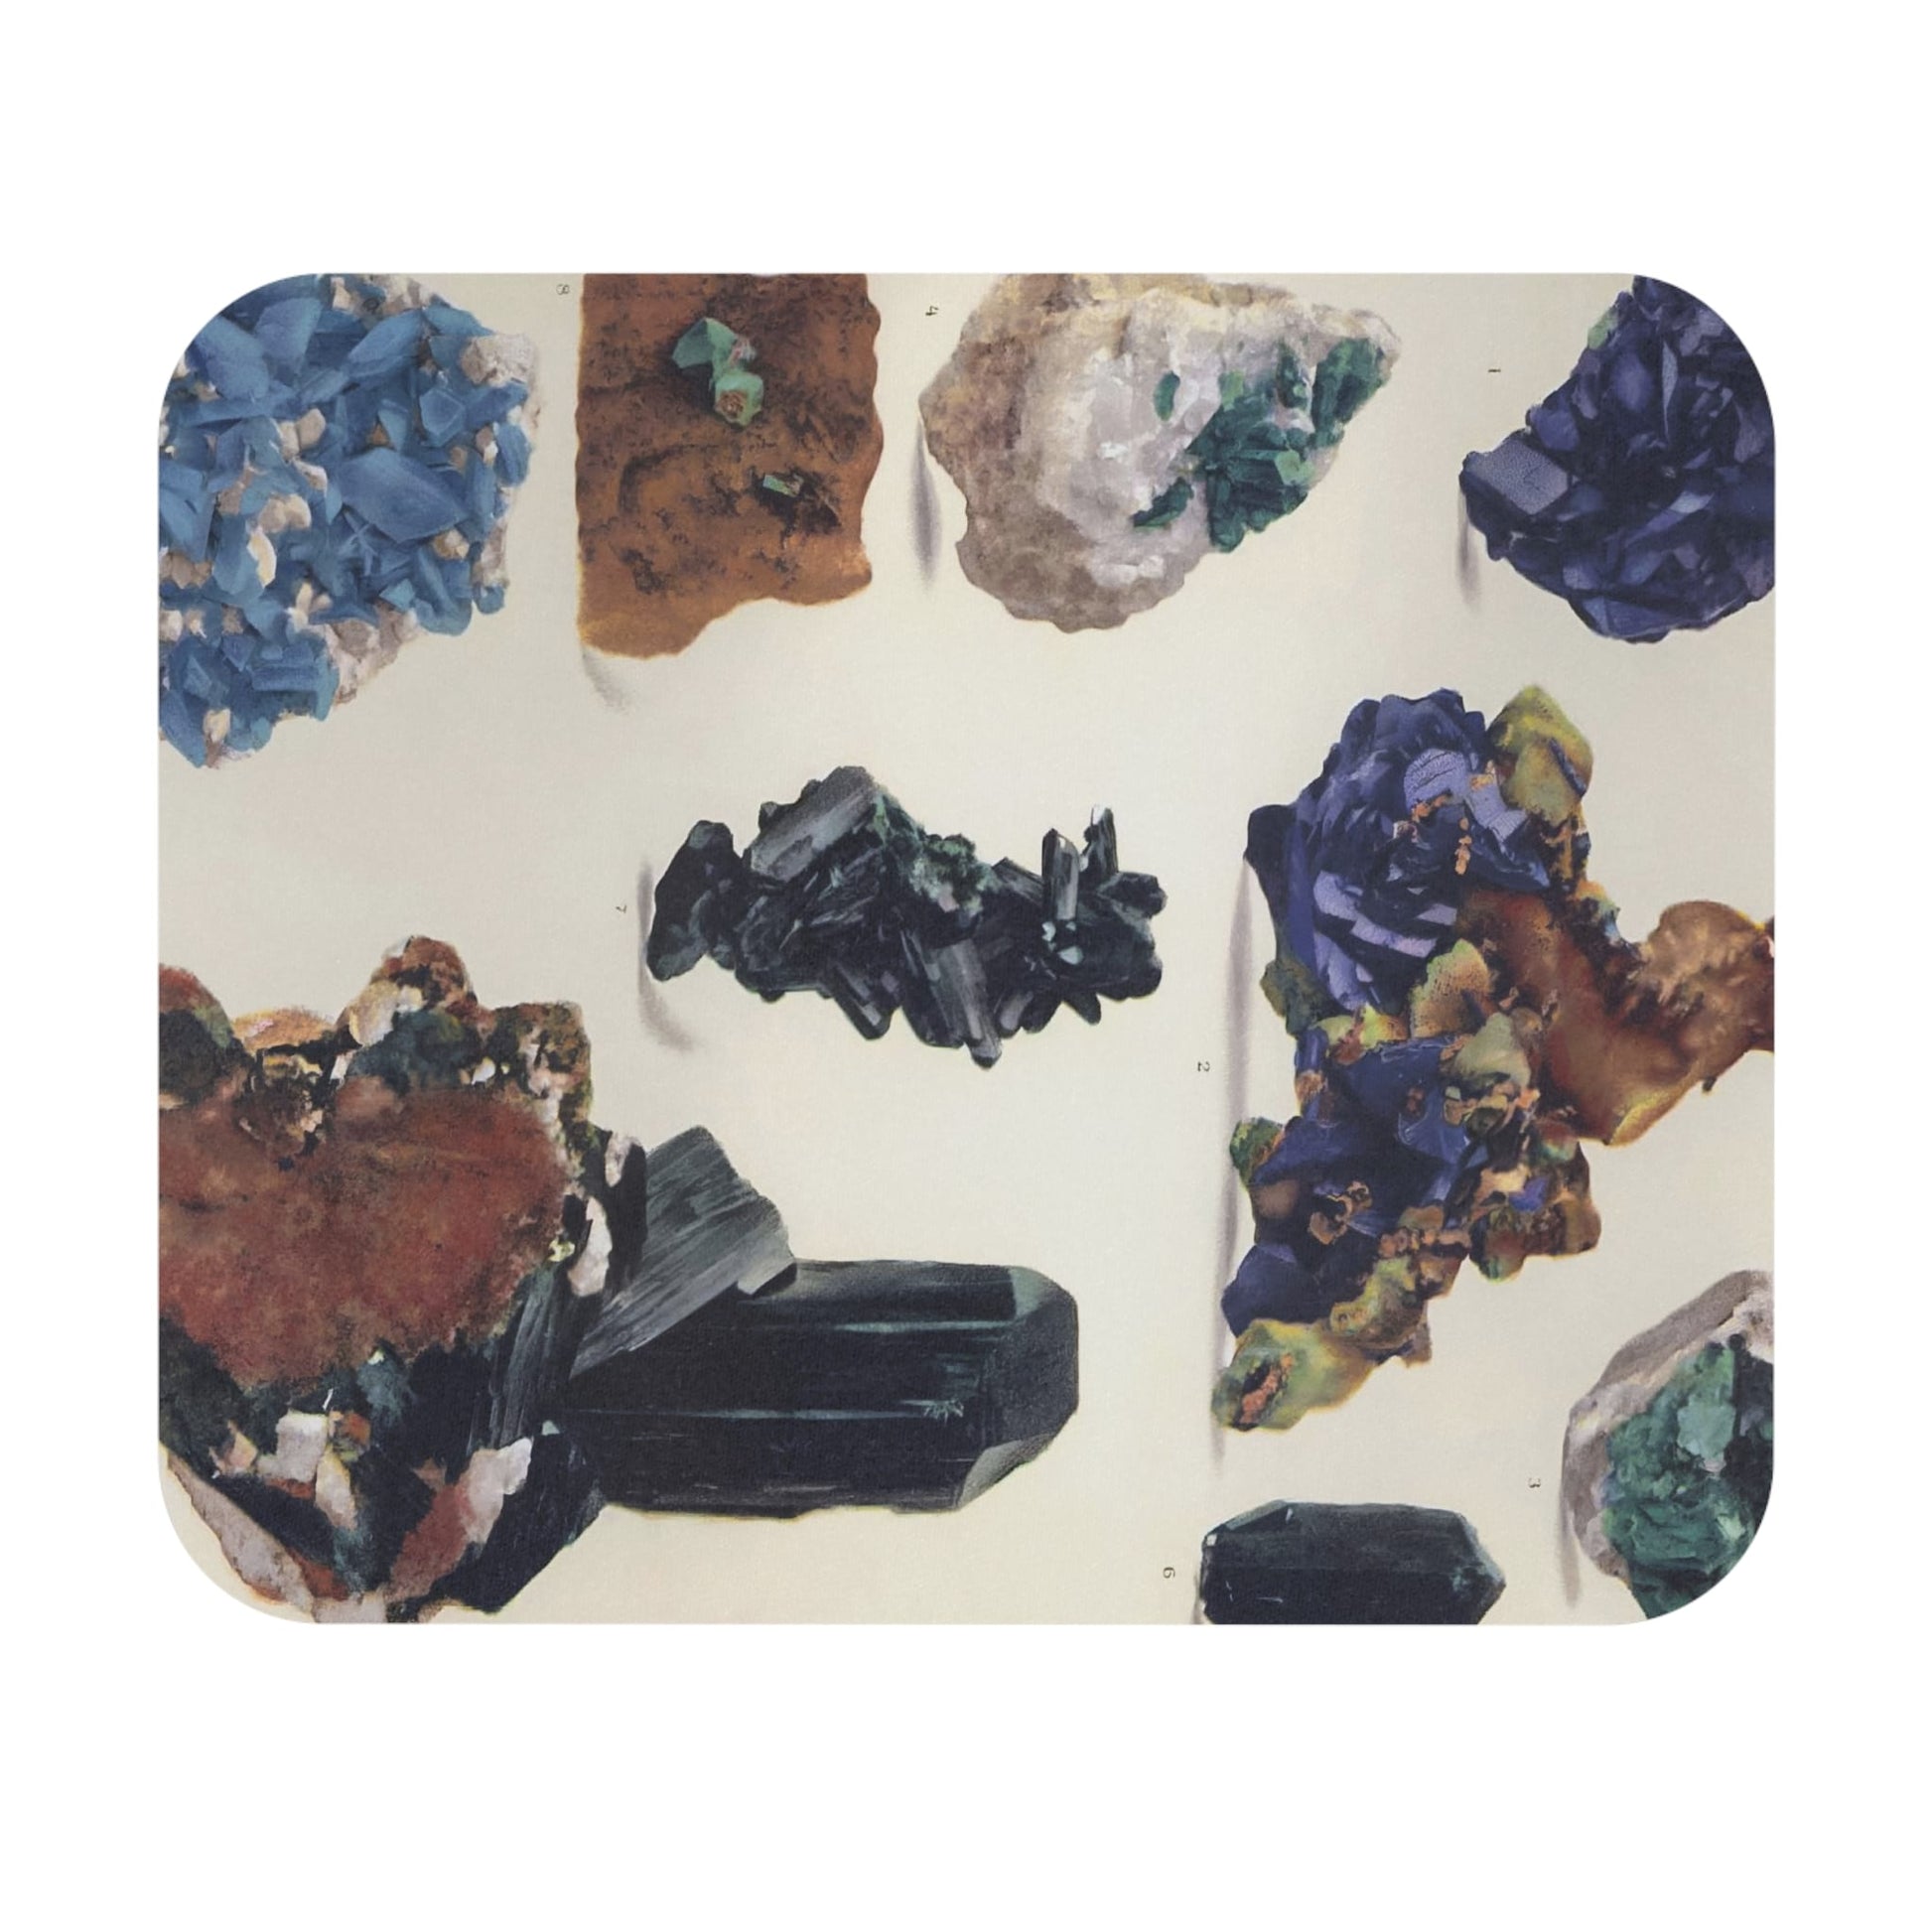 Colorful Gemstone Mouse Pad with multi-color gems art, desk and office decor featuring vibrant gemstone designs.